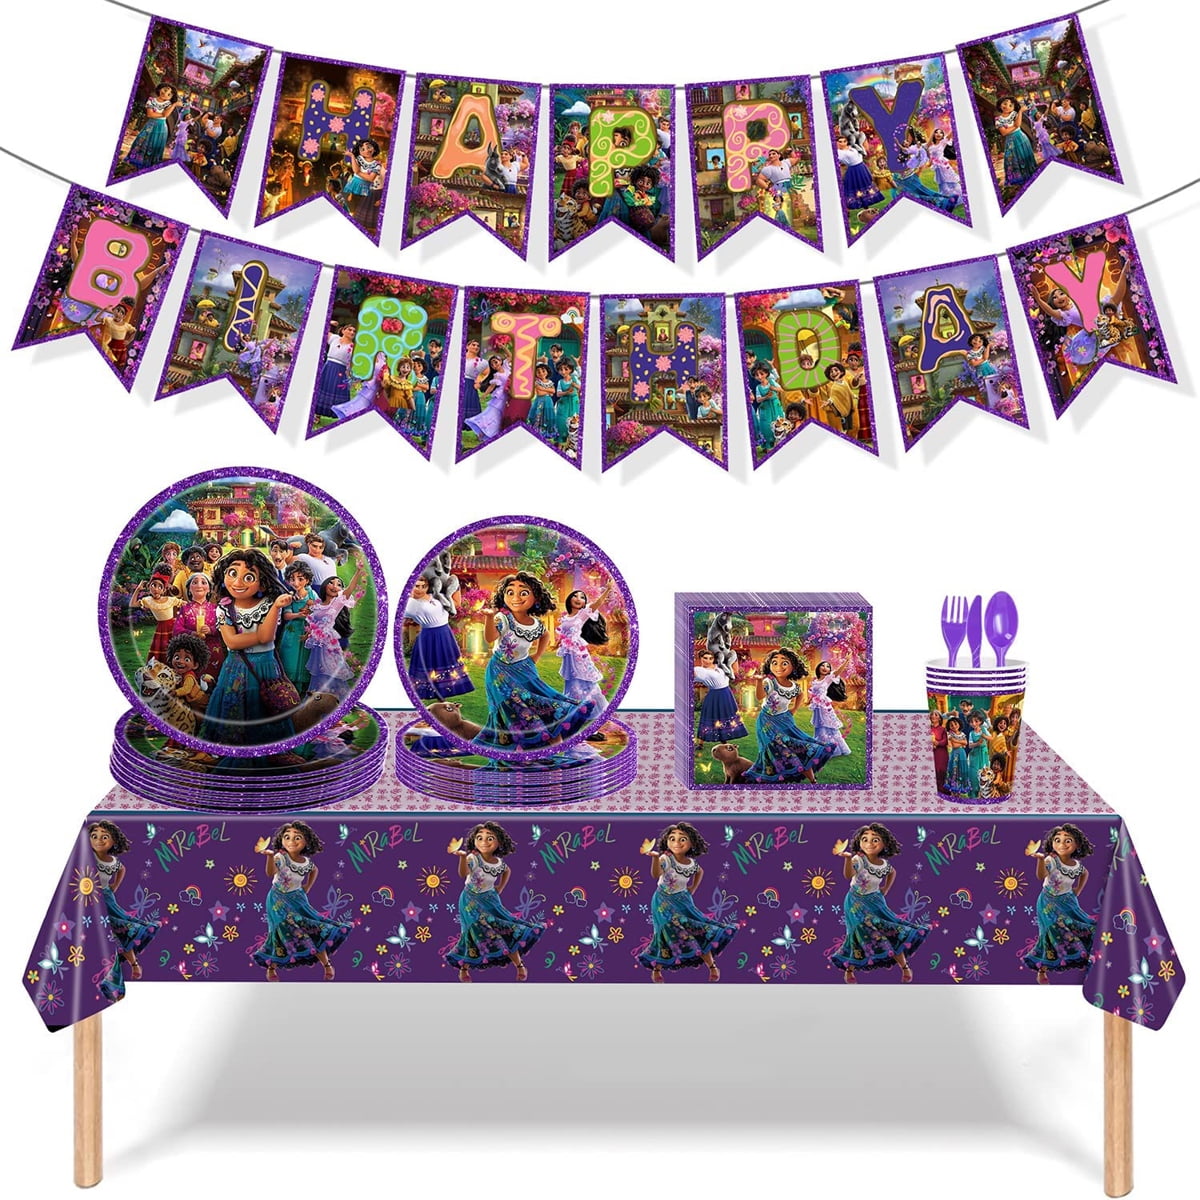 20 Napkin 1 Table Cloth Serves 20 Guest Encanto Birthday Party Supplies,Includes 20 Paper Plates 